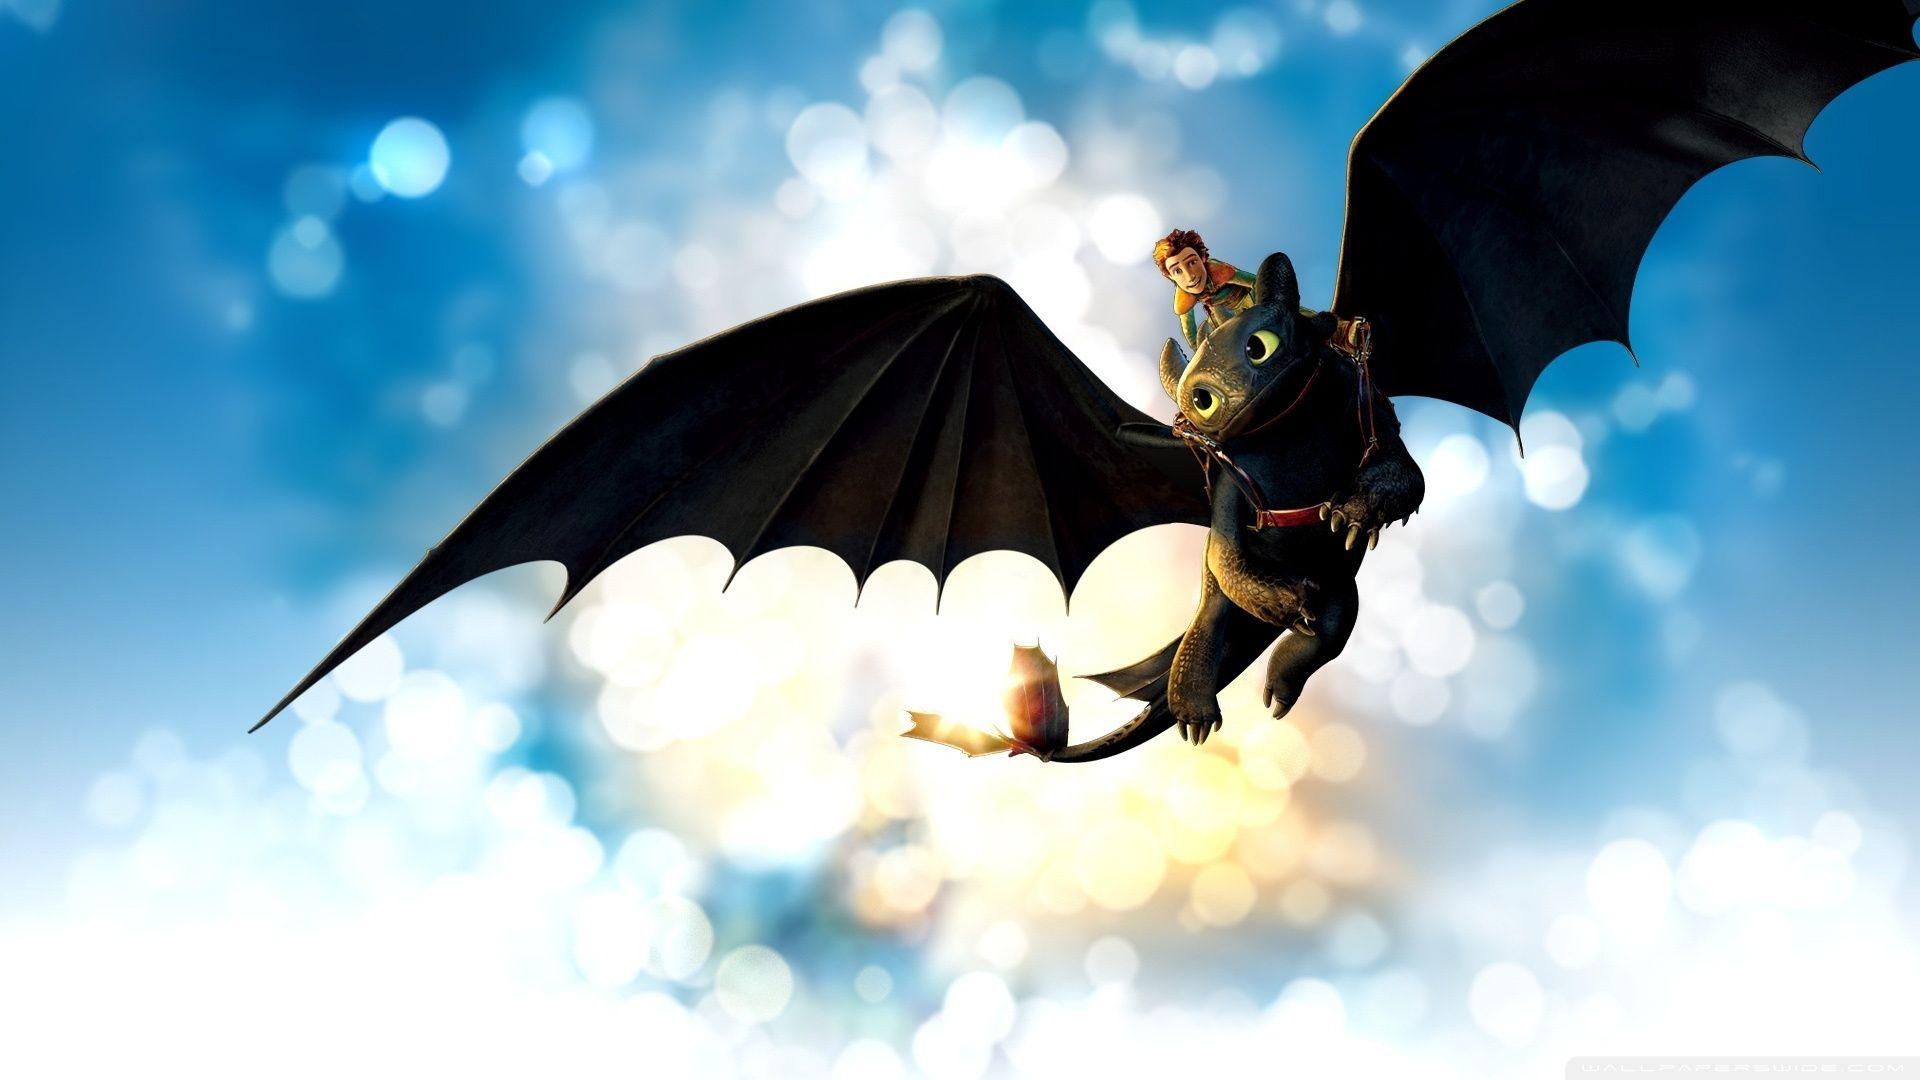 How To Train Your Dragon Wallpapers - Wallpaper Cave